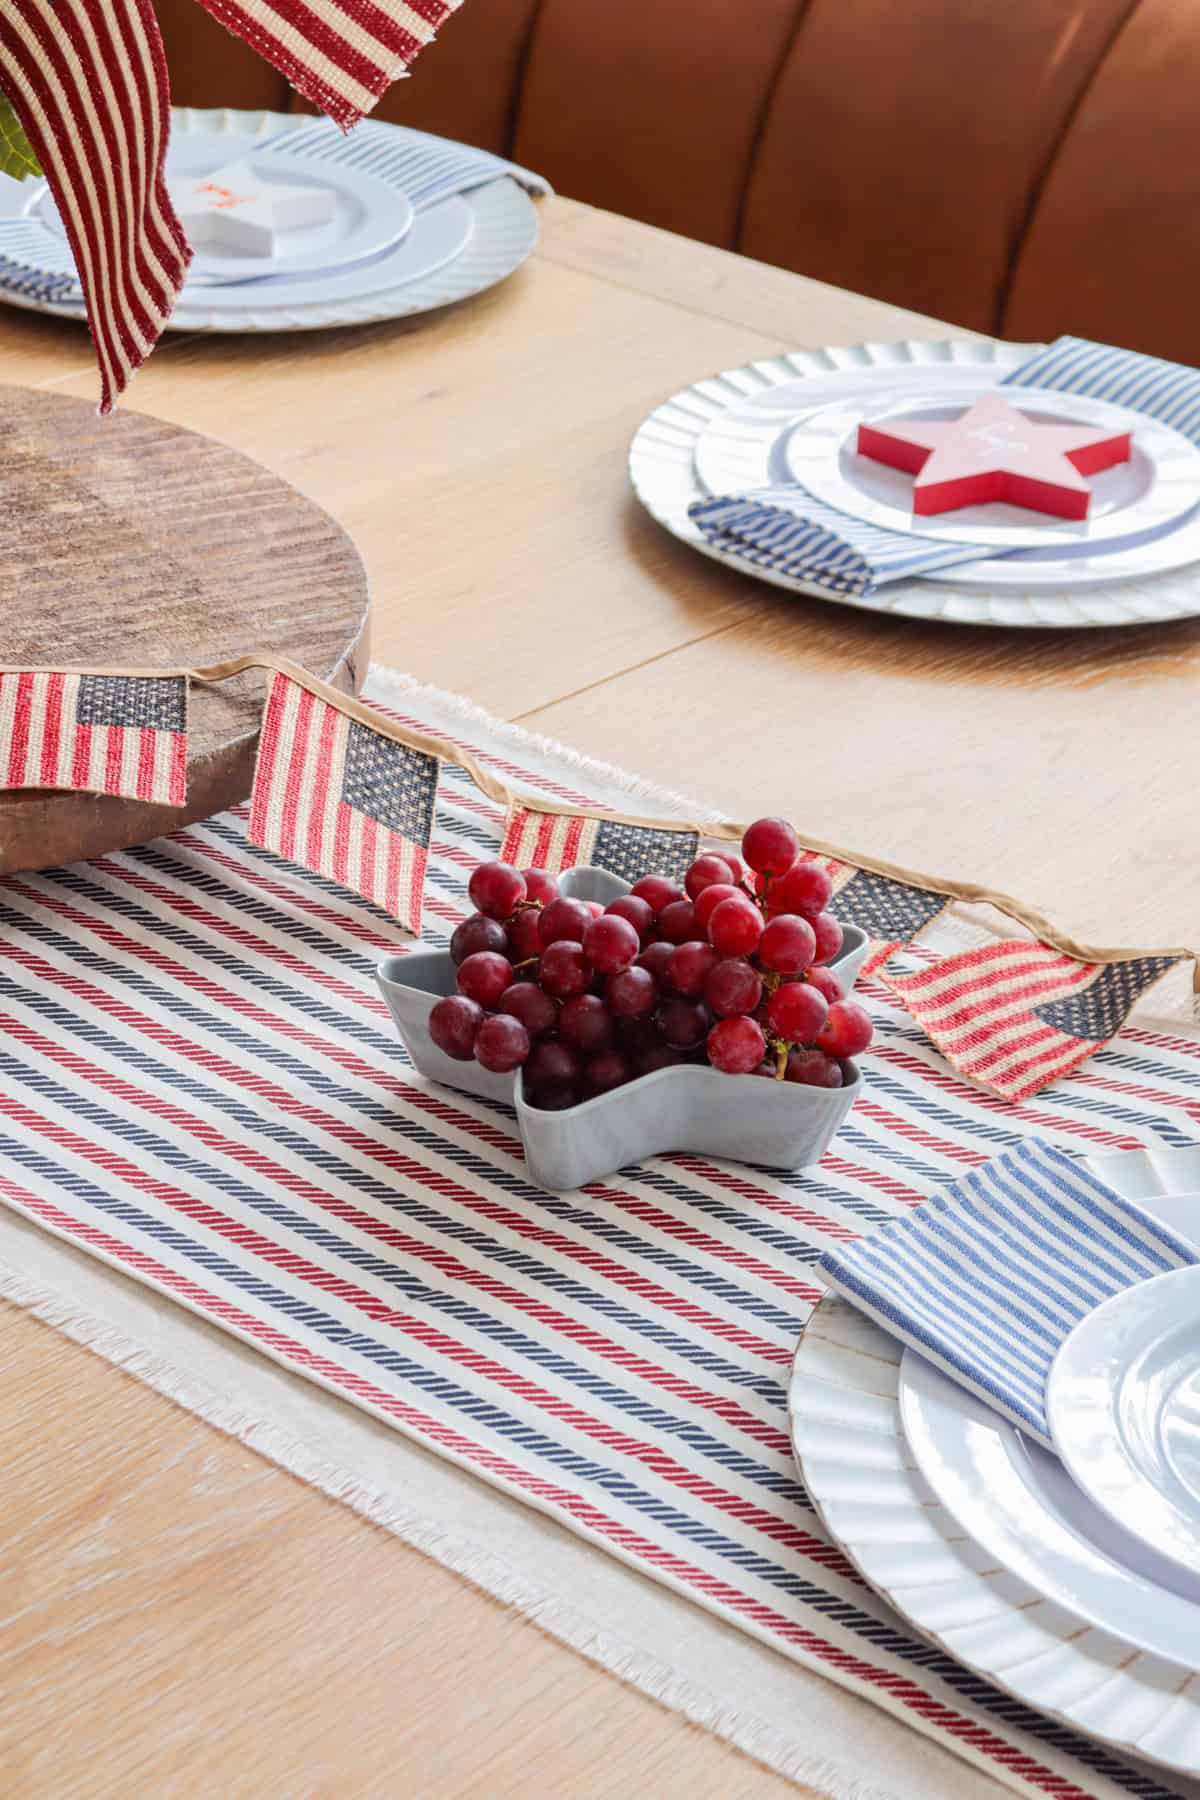 Patriotic tablesetting with red grapes in star dish.